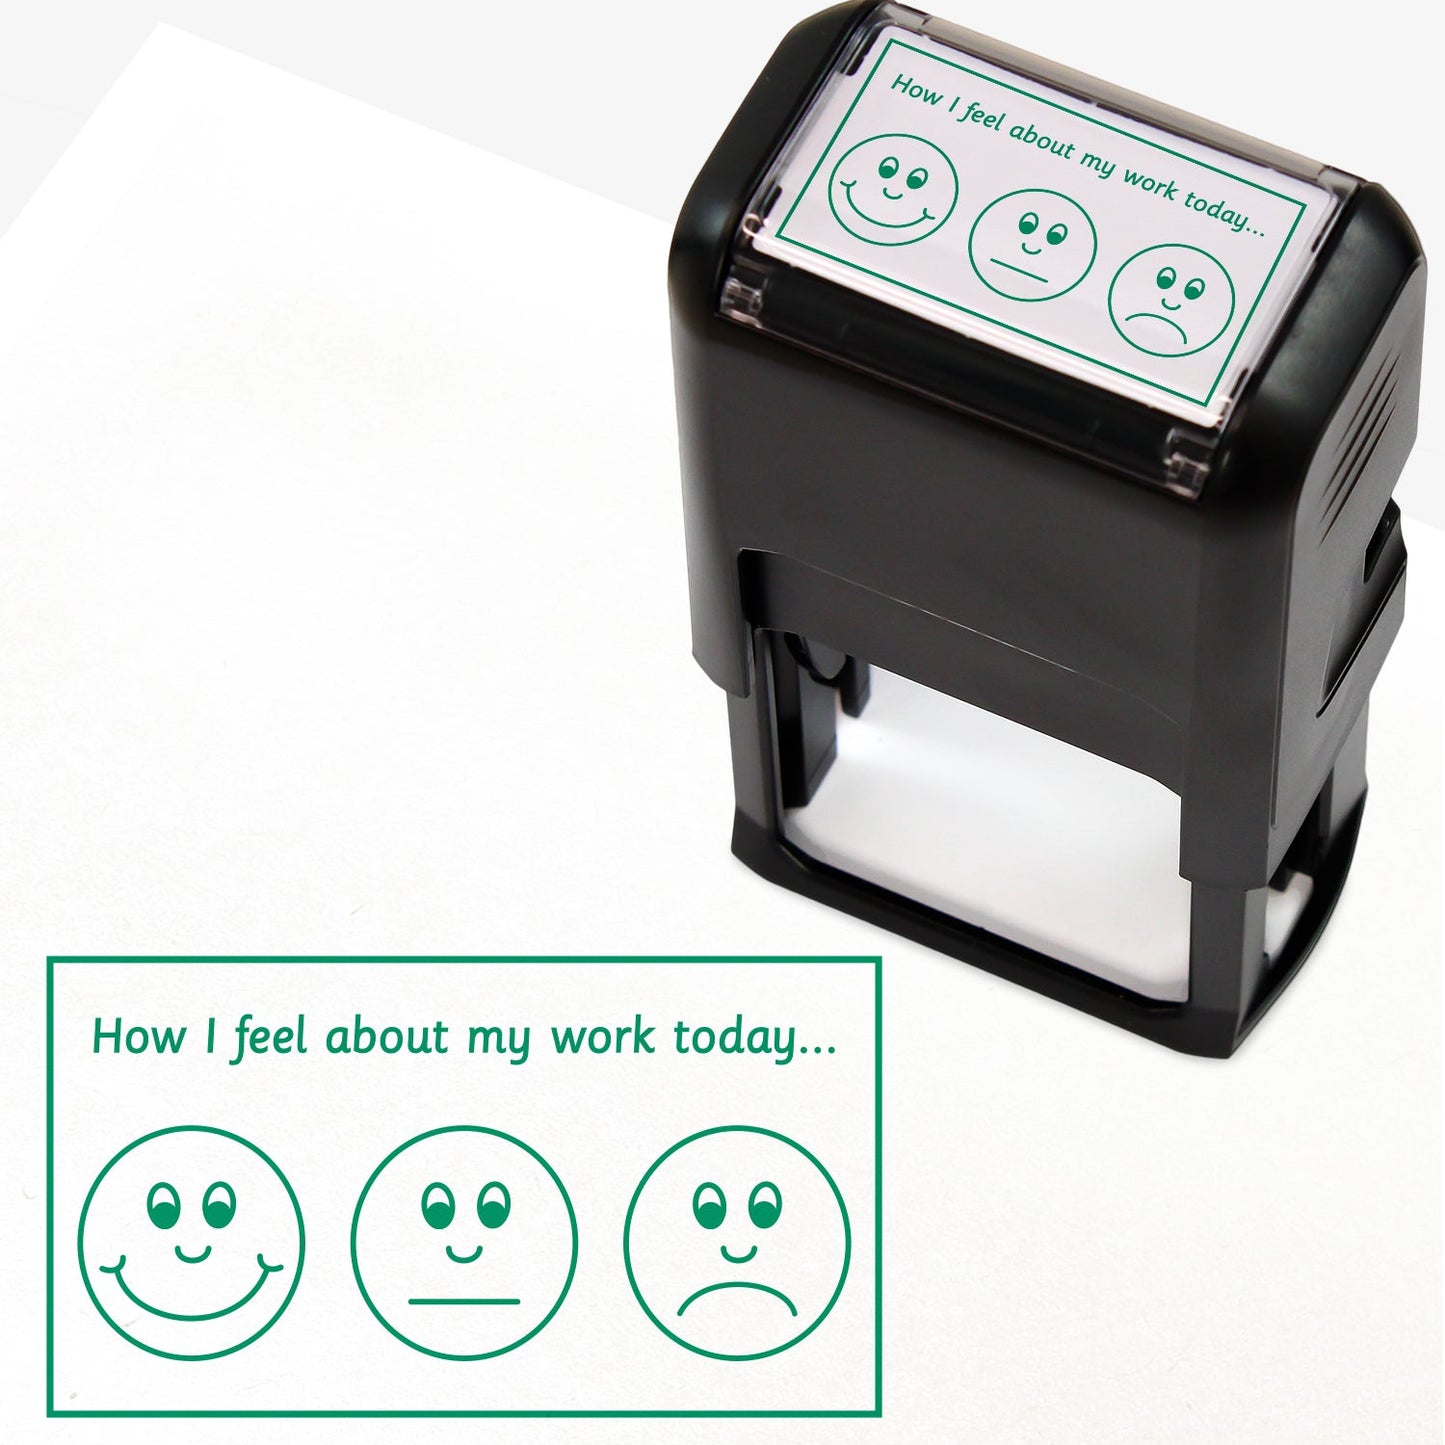 How I Feel About My Work Self Assessment Stamper - Green - 42 x 22mm